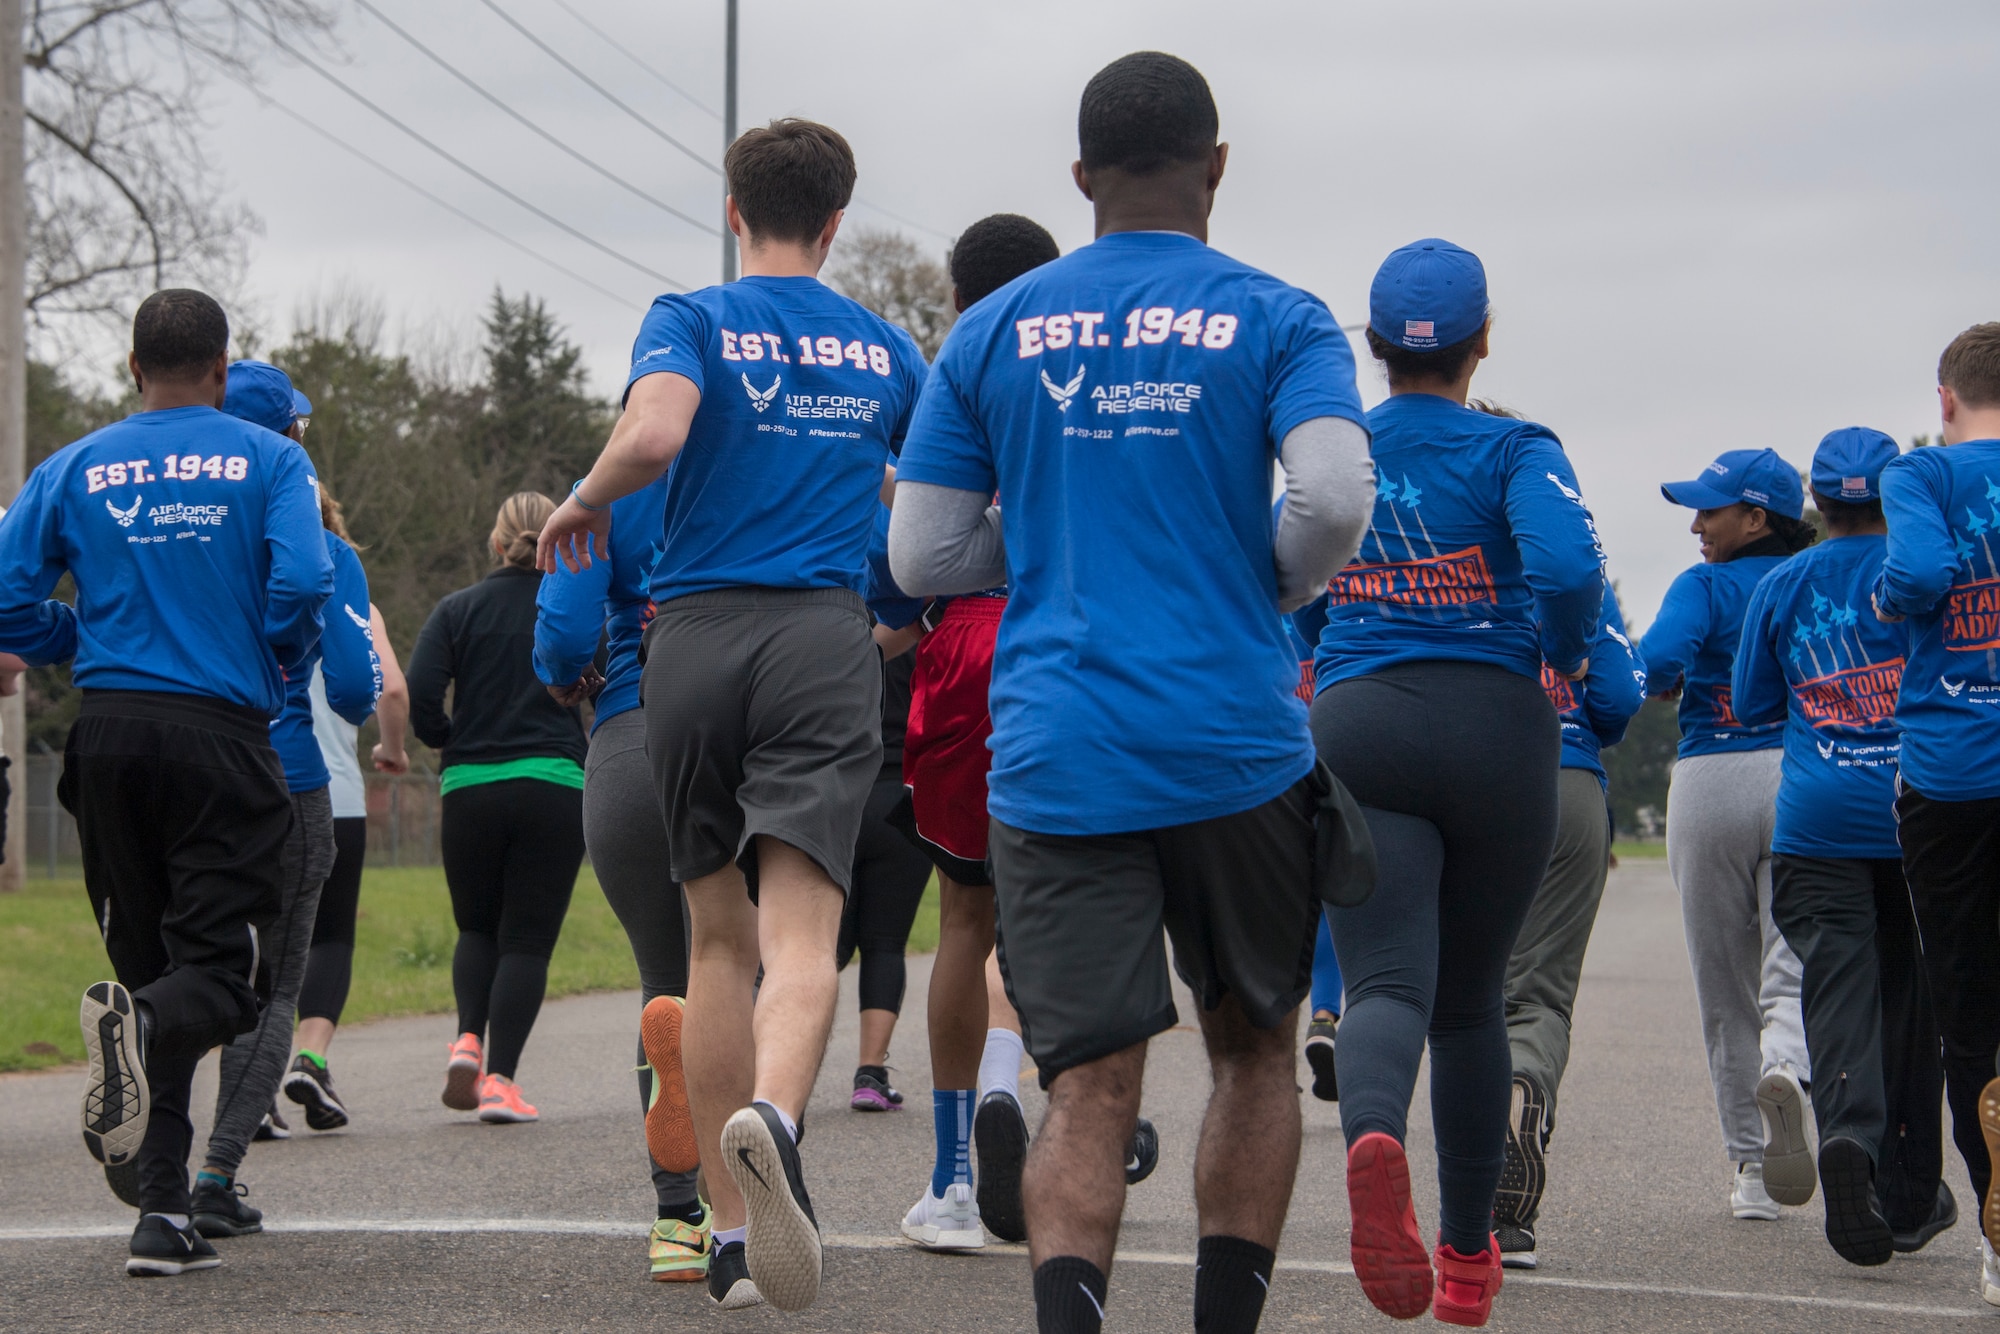 Participants in the 307th Force Support Squadron's Shamrock 5K begin the run at Barksdale Air Force Base, Louisiana, March 2nd, 2019. The run was held to promote fitness and morale throughout the 307th Bomb Wing. (U.S. Air Force photo by Staff Sgt. Callie Ware)